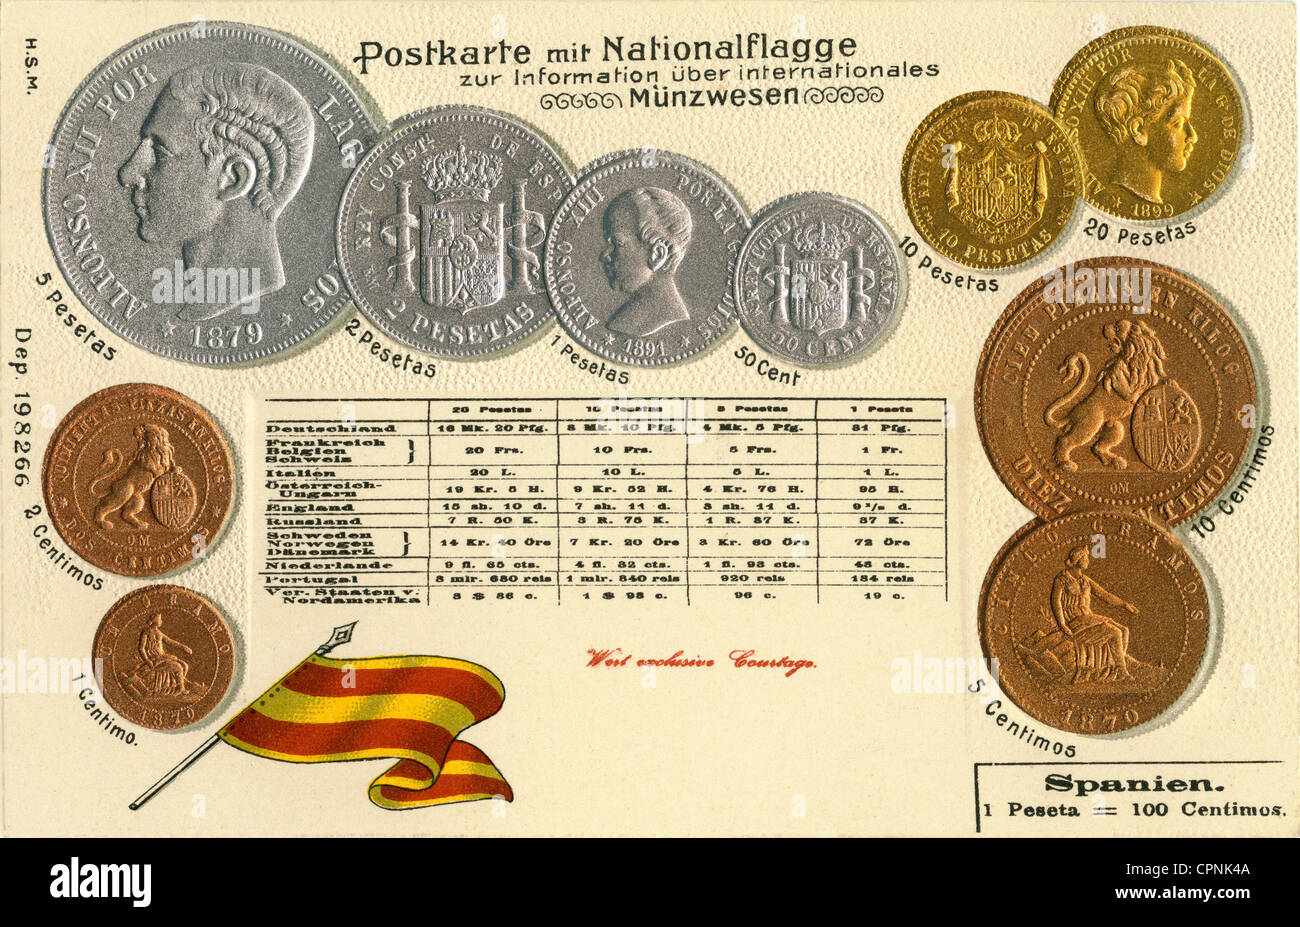 money / finances,coins,Germany,Spain,circa 1899,Spanish coins,Centimos and peseta,postcard out of the series international coinage,embossing,from 1 Centimo up to 20 peseta,King Alfonso XII,King Alfonso XIII,1 peseta = 100 Centimos,copper,silver coins,gold coin,1870,1879,1891,1899,price coins,exchange rate,conversion table,conversion tables,Spanish,economy,economic history,19th century,small change,postcard,postal card,postcards,postal cards,embossing,emboss,hard cash,coined money,coin,coins,foreign exchange,financial mean,Additional-Rights-Clearences-Not Available Stock Photo